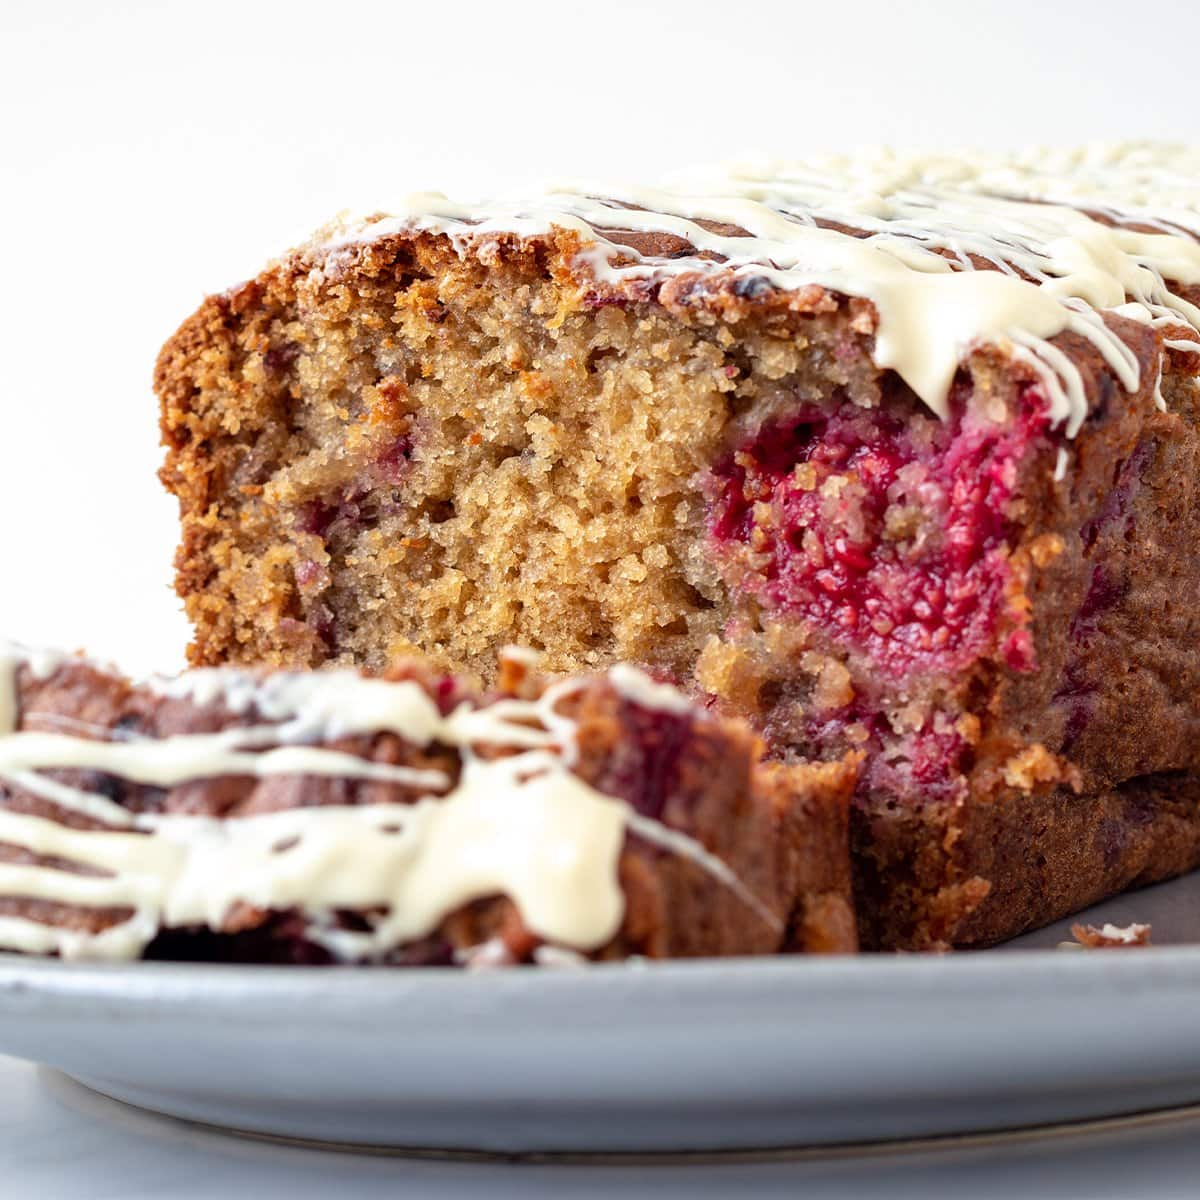 A close up picture of a raspberry and white chocolate cake showing the internal fluffy texture of the cake.